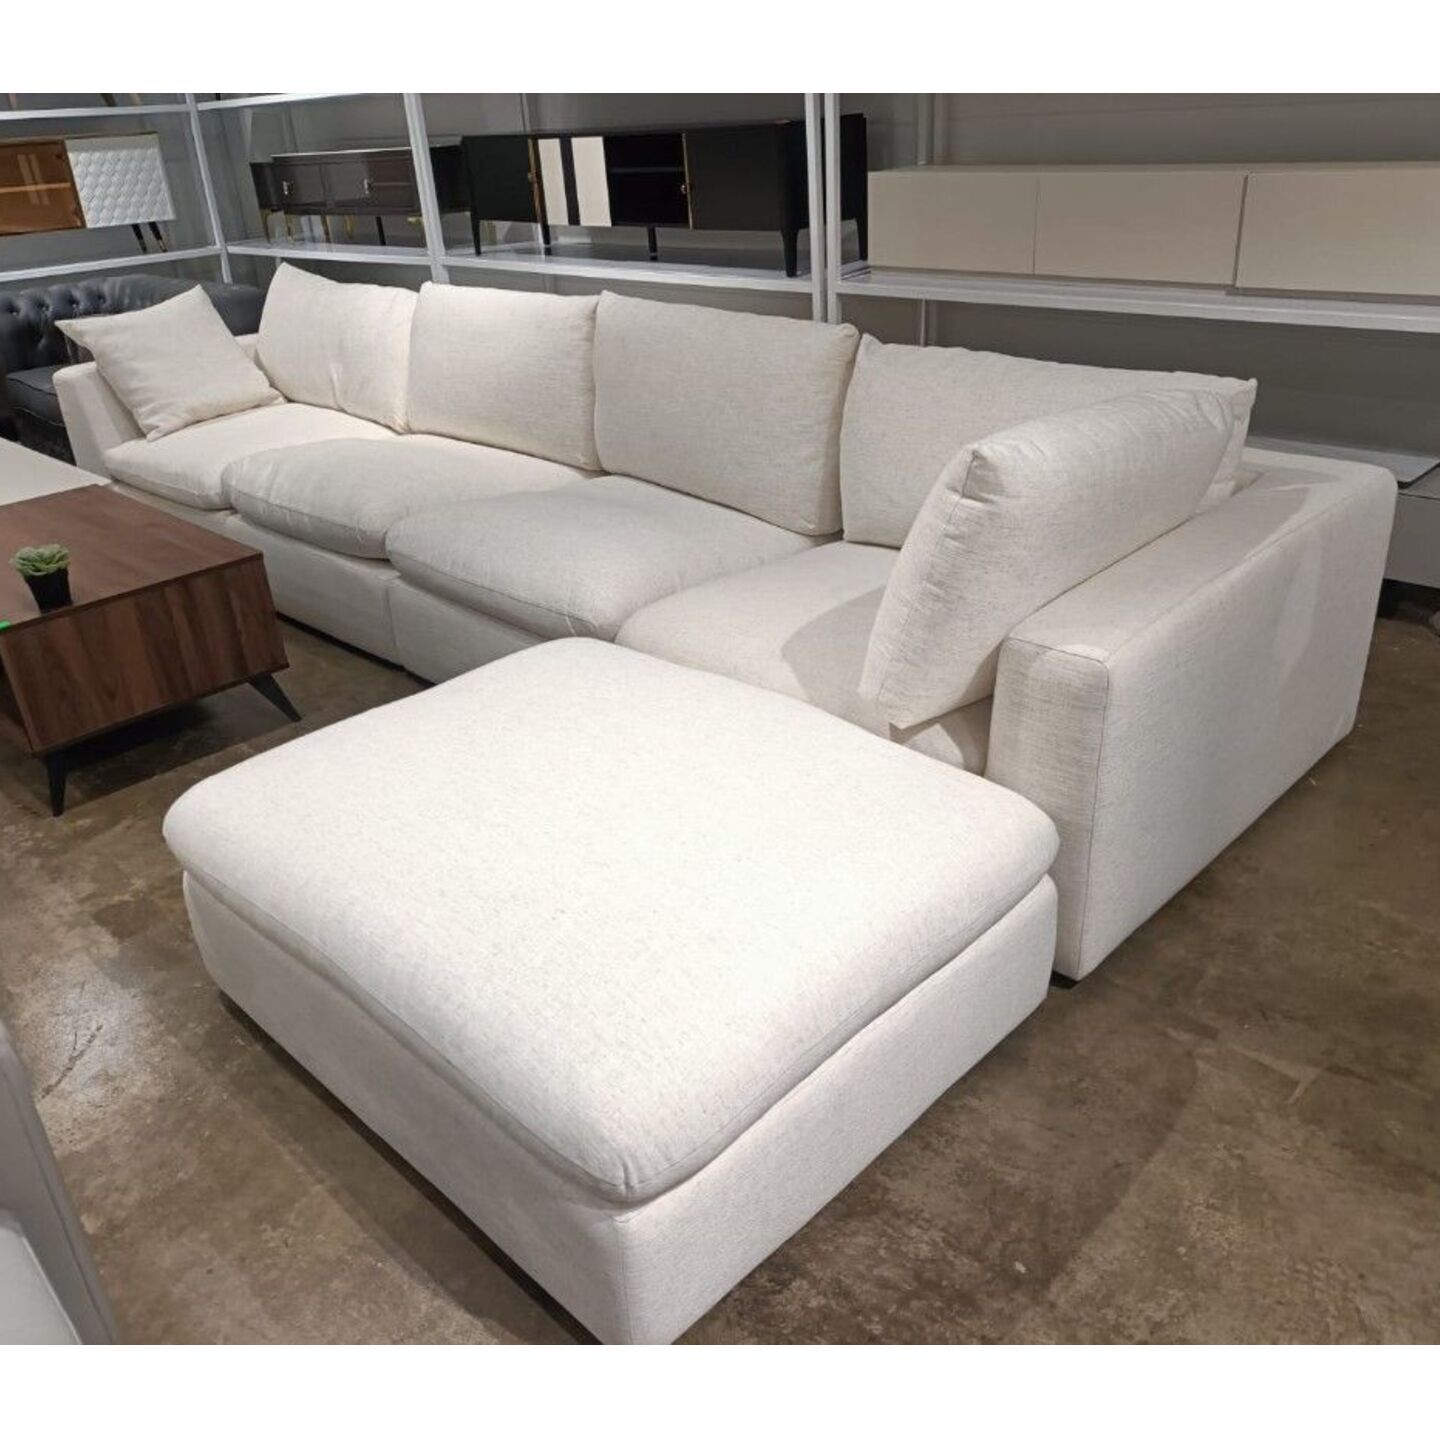 SKYVALE Chaise Sectional Sofa with Ottoman in BEACH LINEN FABRIC